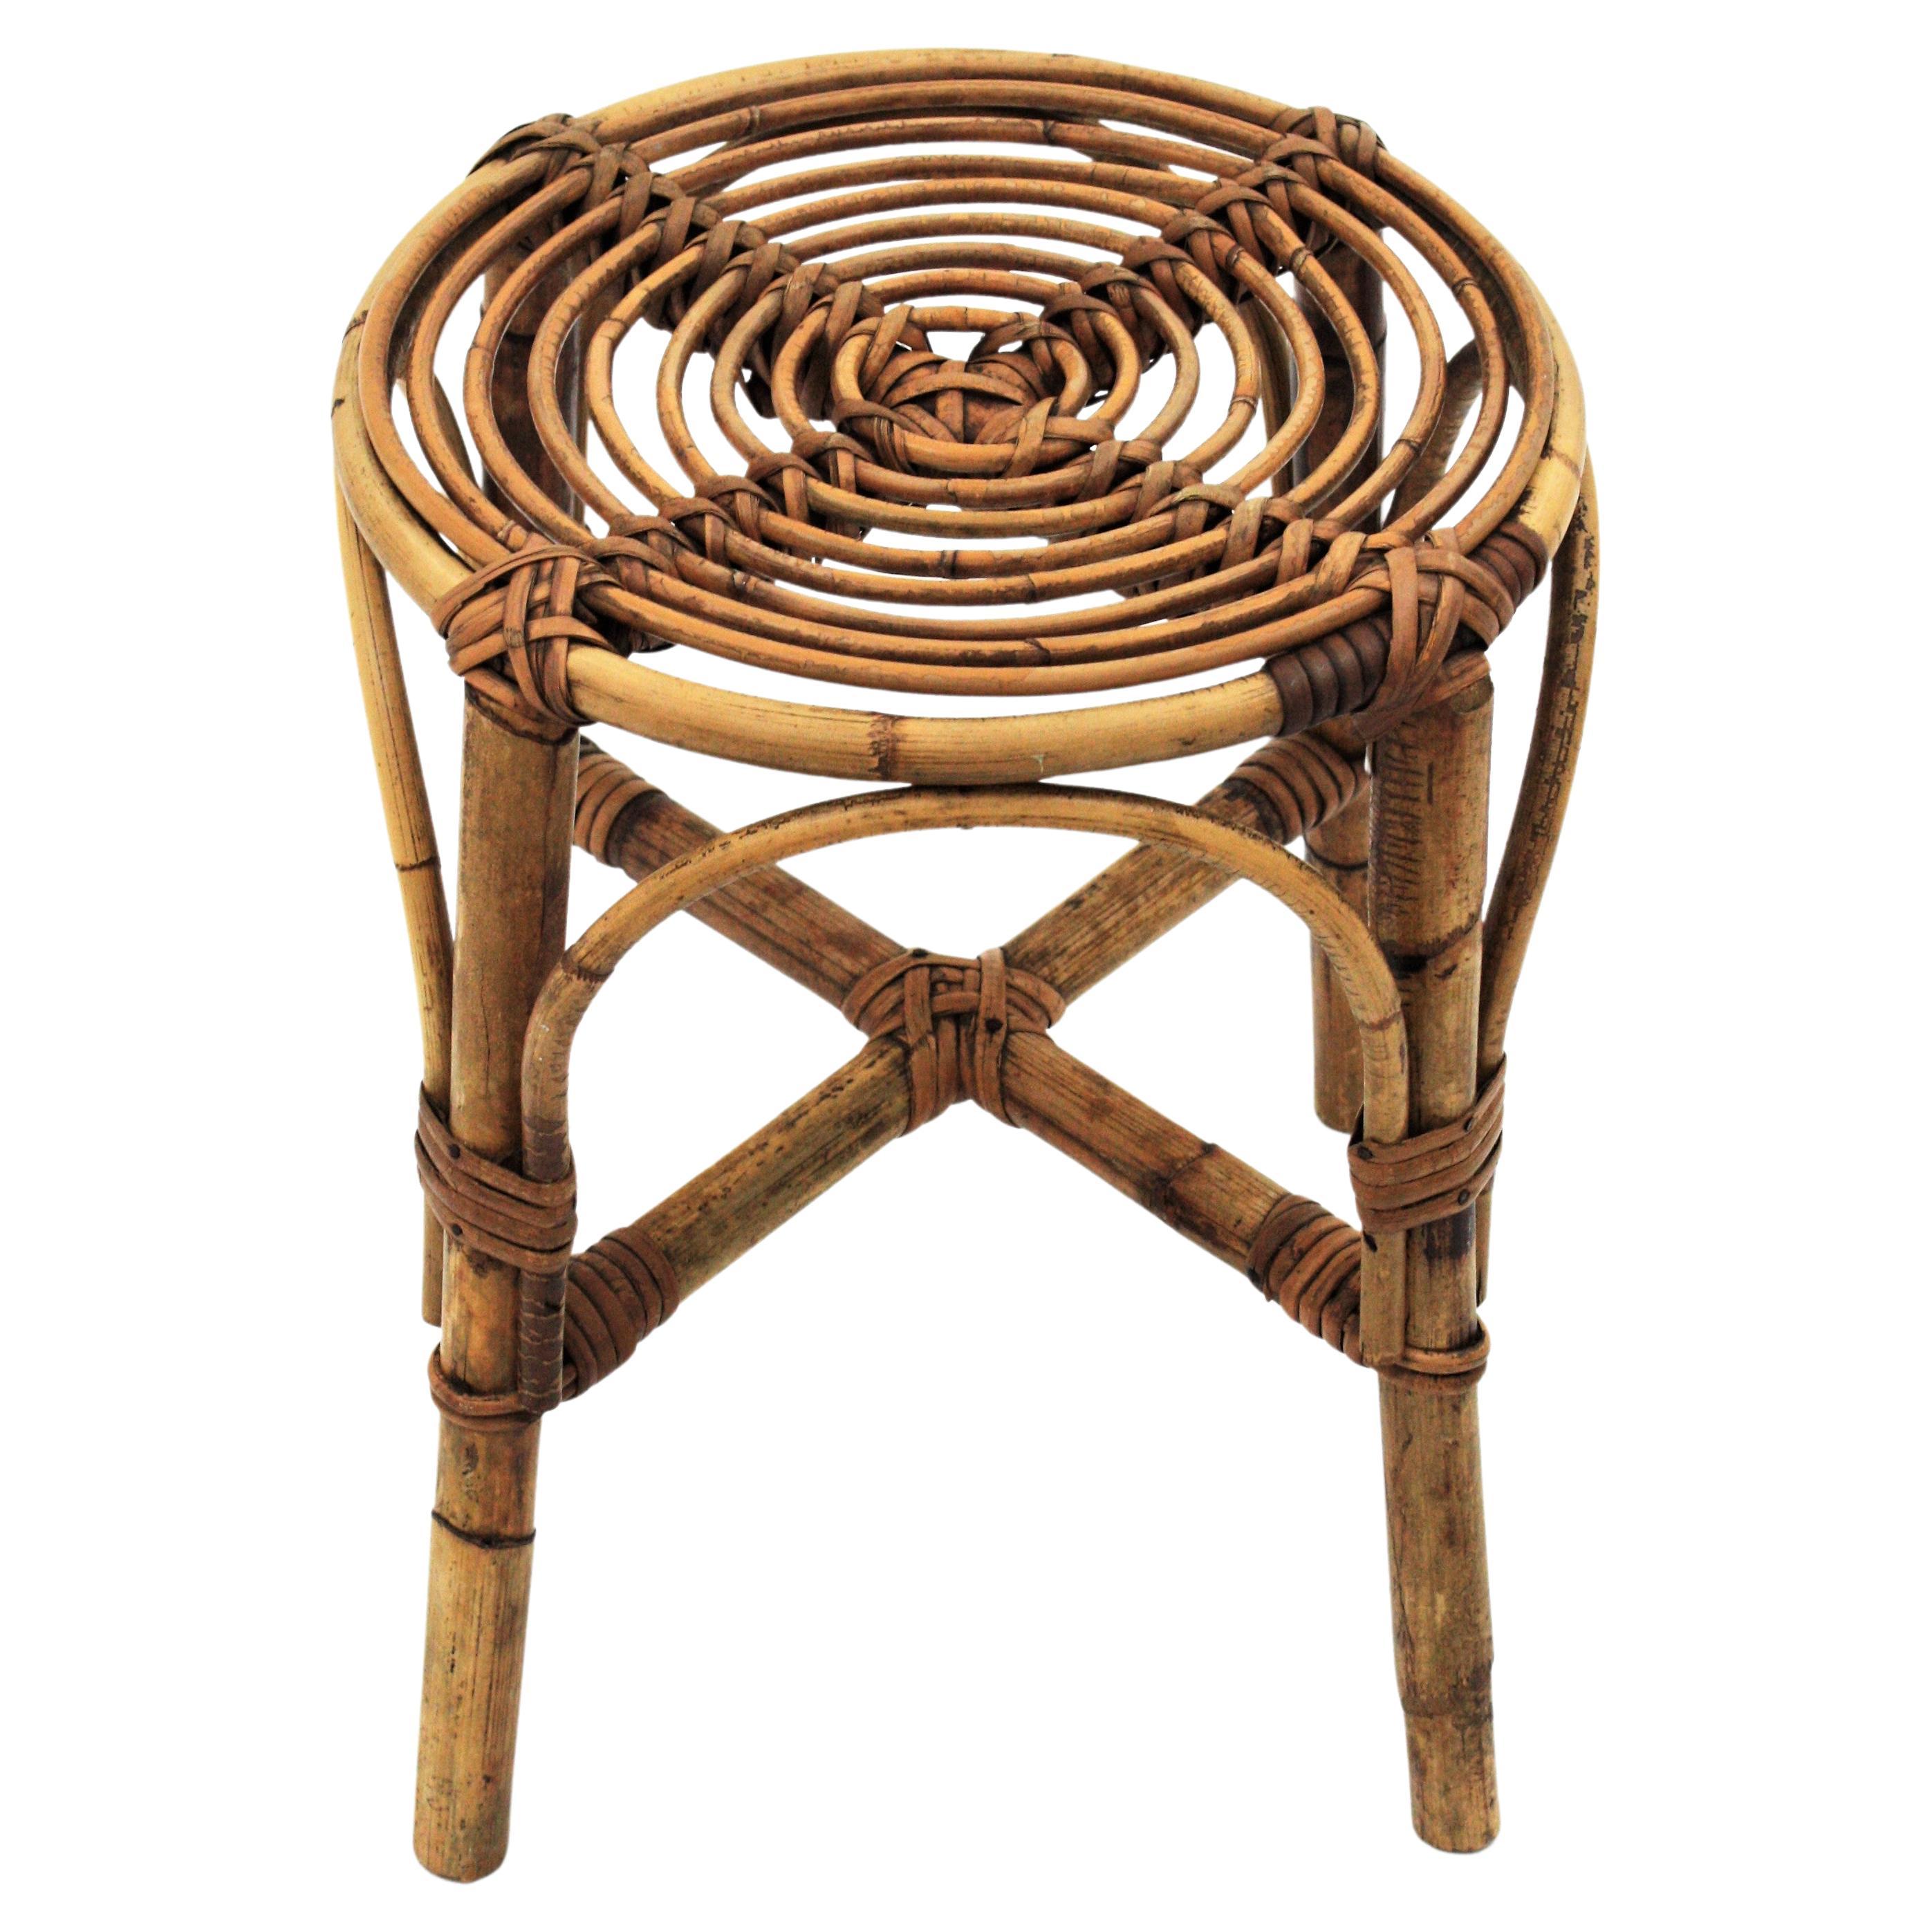 Beautiful Mid-Century Modern stool handcrafted in bamboo and rattan. Spain, 1950s-1960s.
This stool has an eye-catching construction. It has round top made of concentric rattan canes with bamboo canes as main structure and some accents in wicker. It